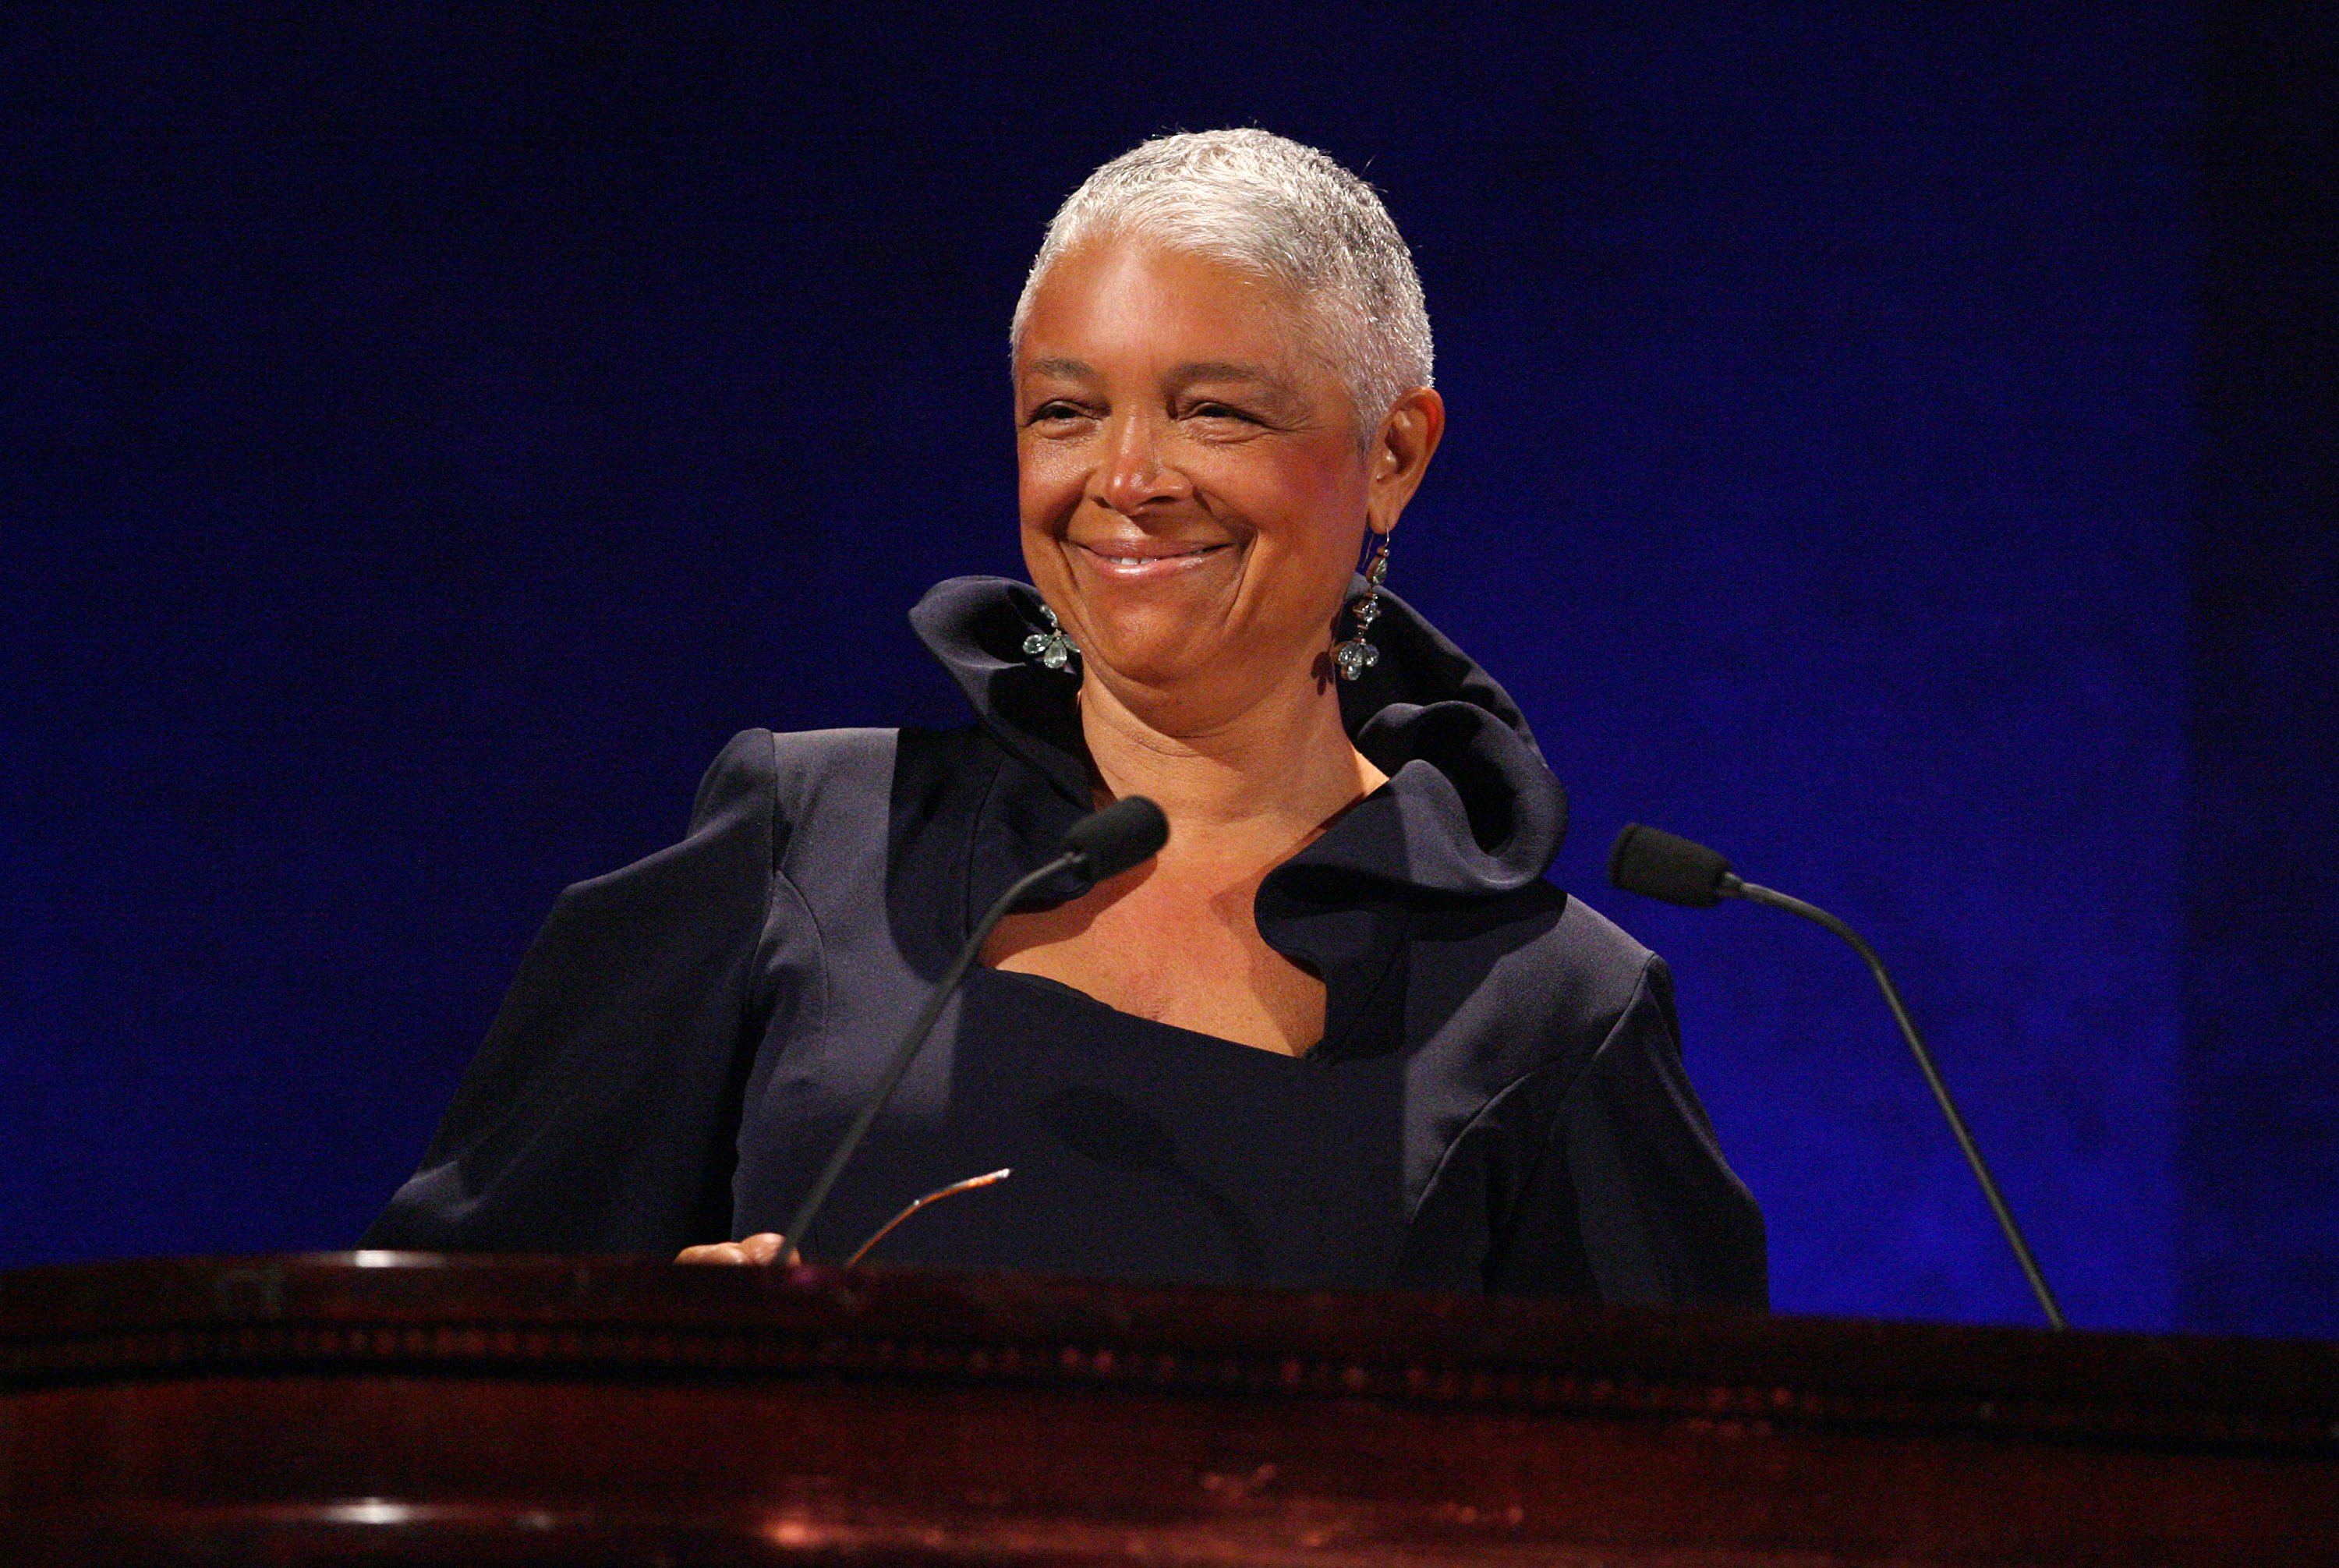 Camille Cosby speaks on stage at the 35th Anniversary of the Jackie Robinson Foundation hosted by Bill Cosby on March 3, 2008 in New York City. | Photo: Getty Images